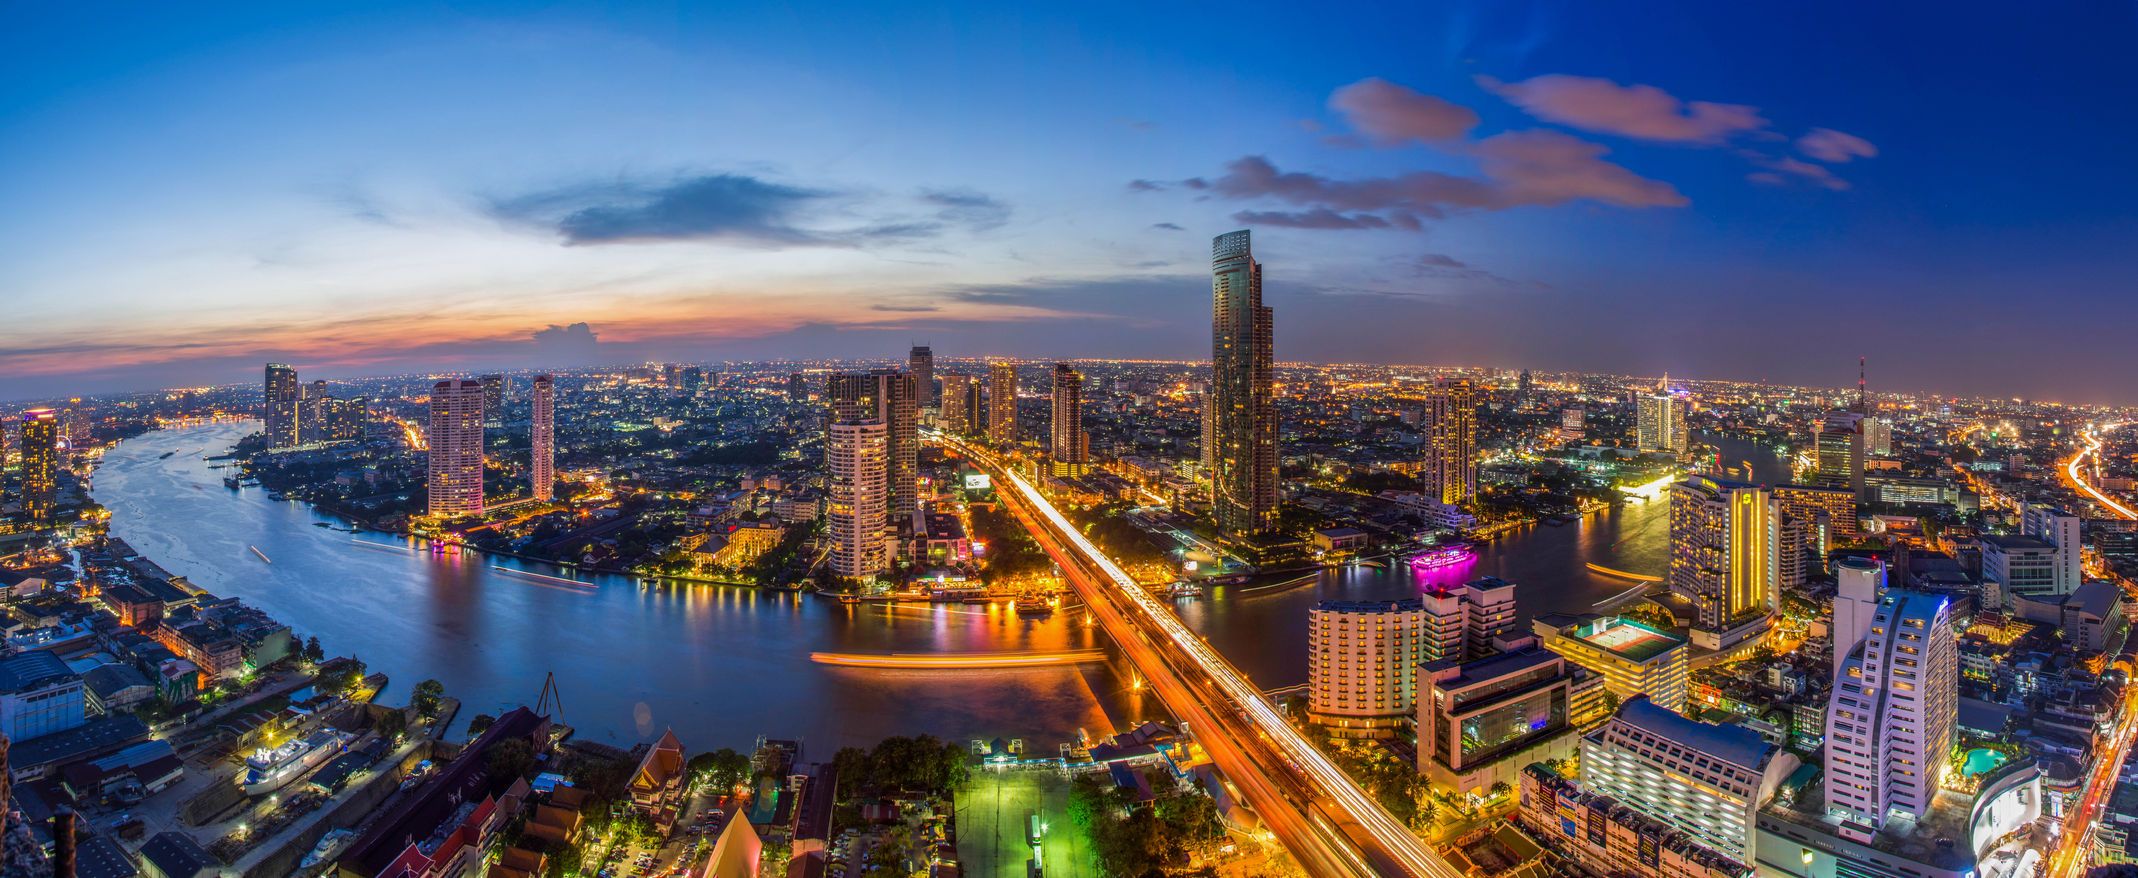 Thailand For Investors: What Will The Impact Of COVID-19 Be?